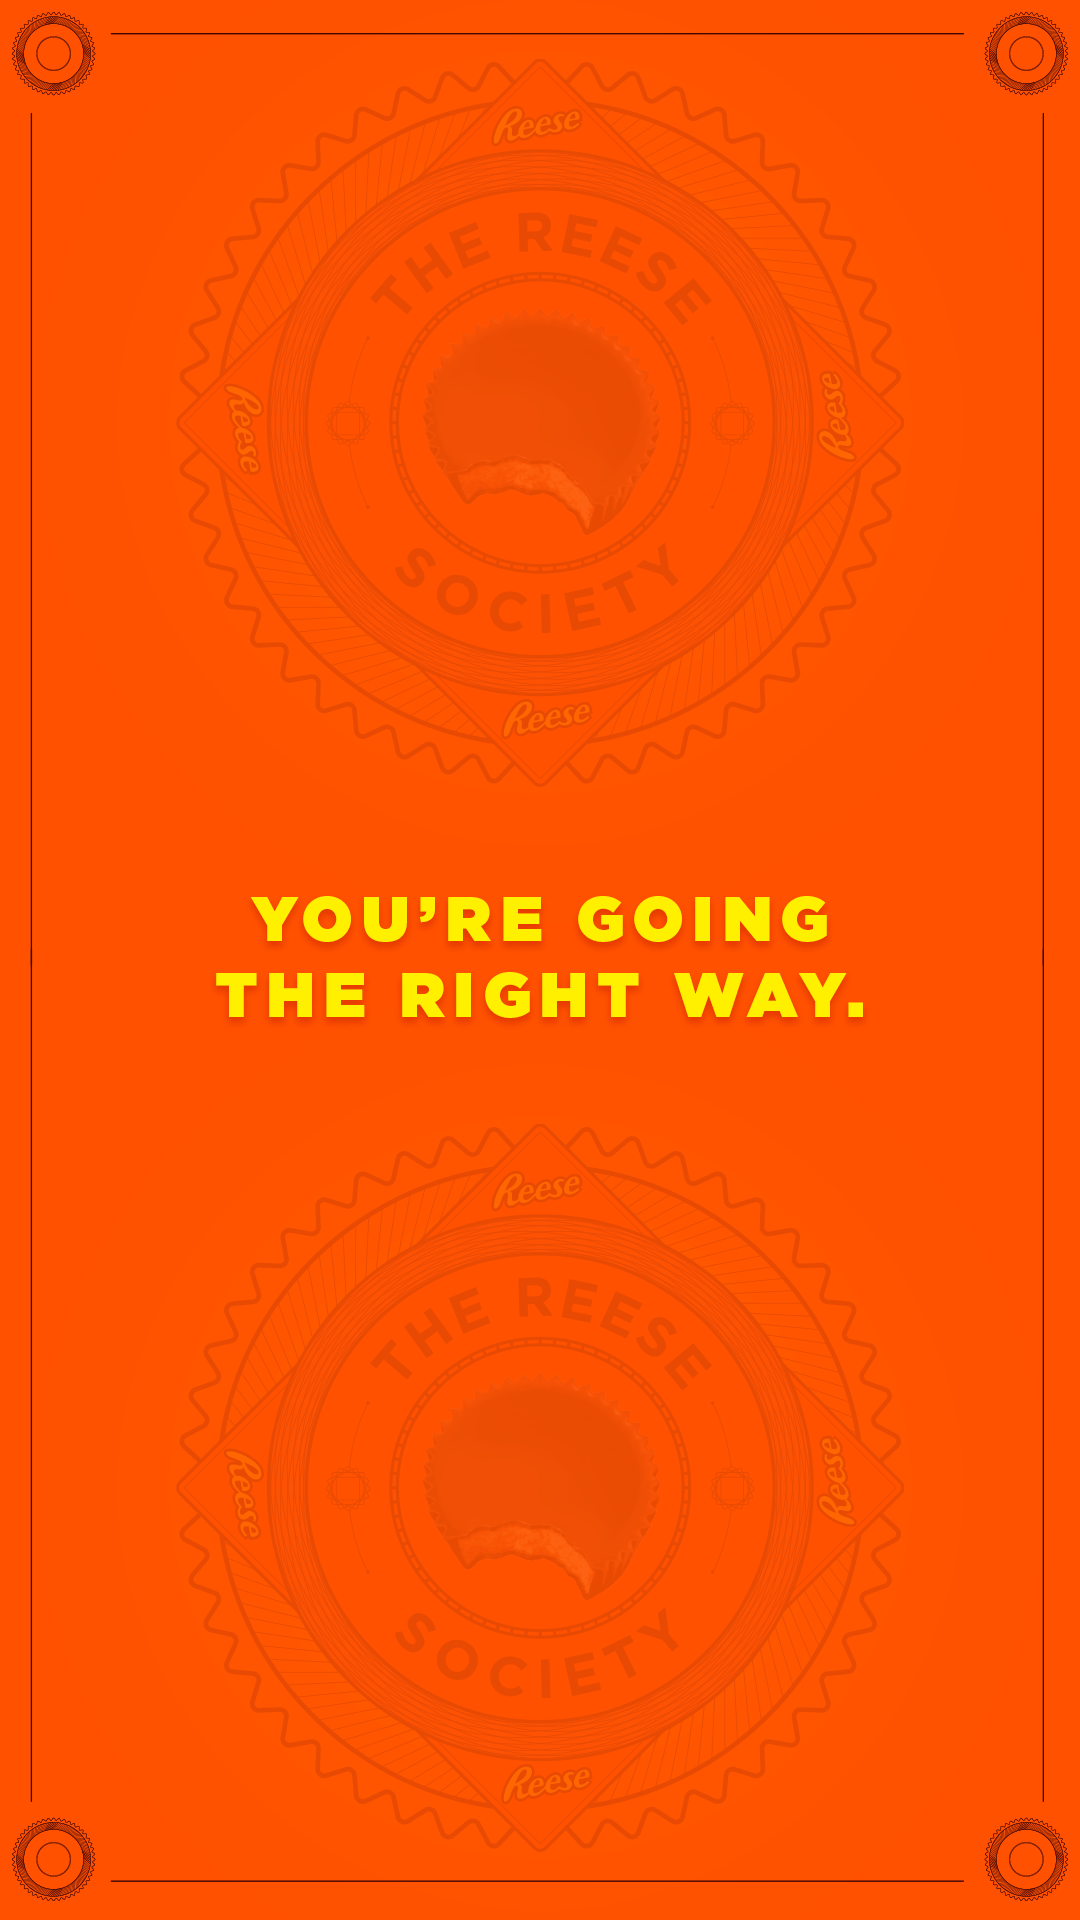 Reese-Society-IG_0090_You’re-going-the-right-way.png